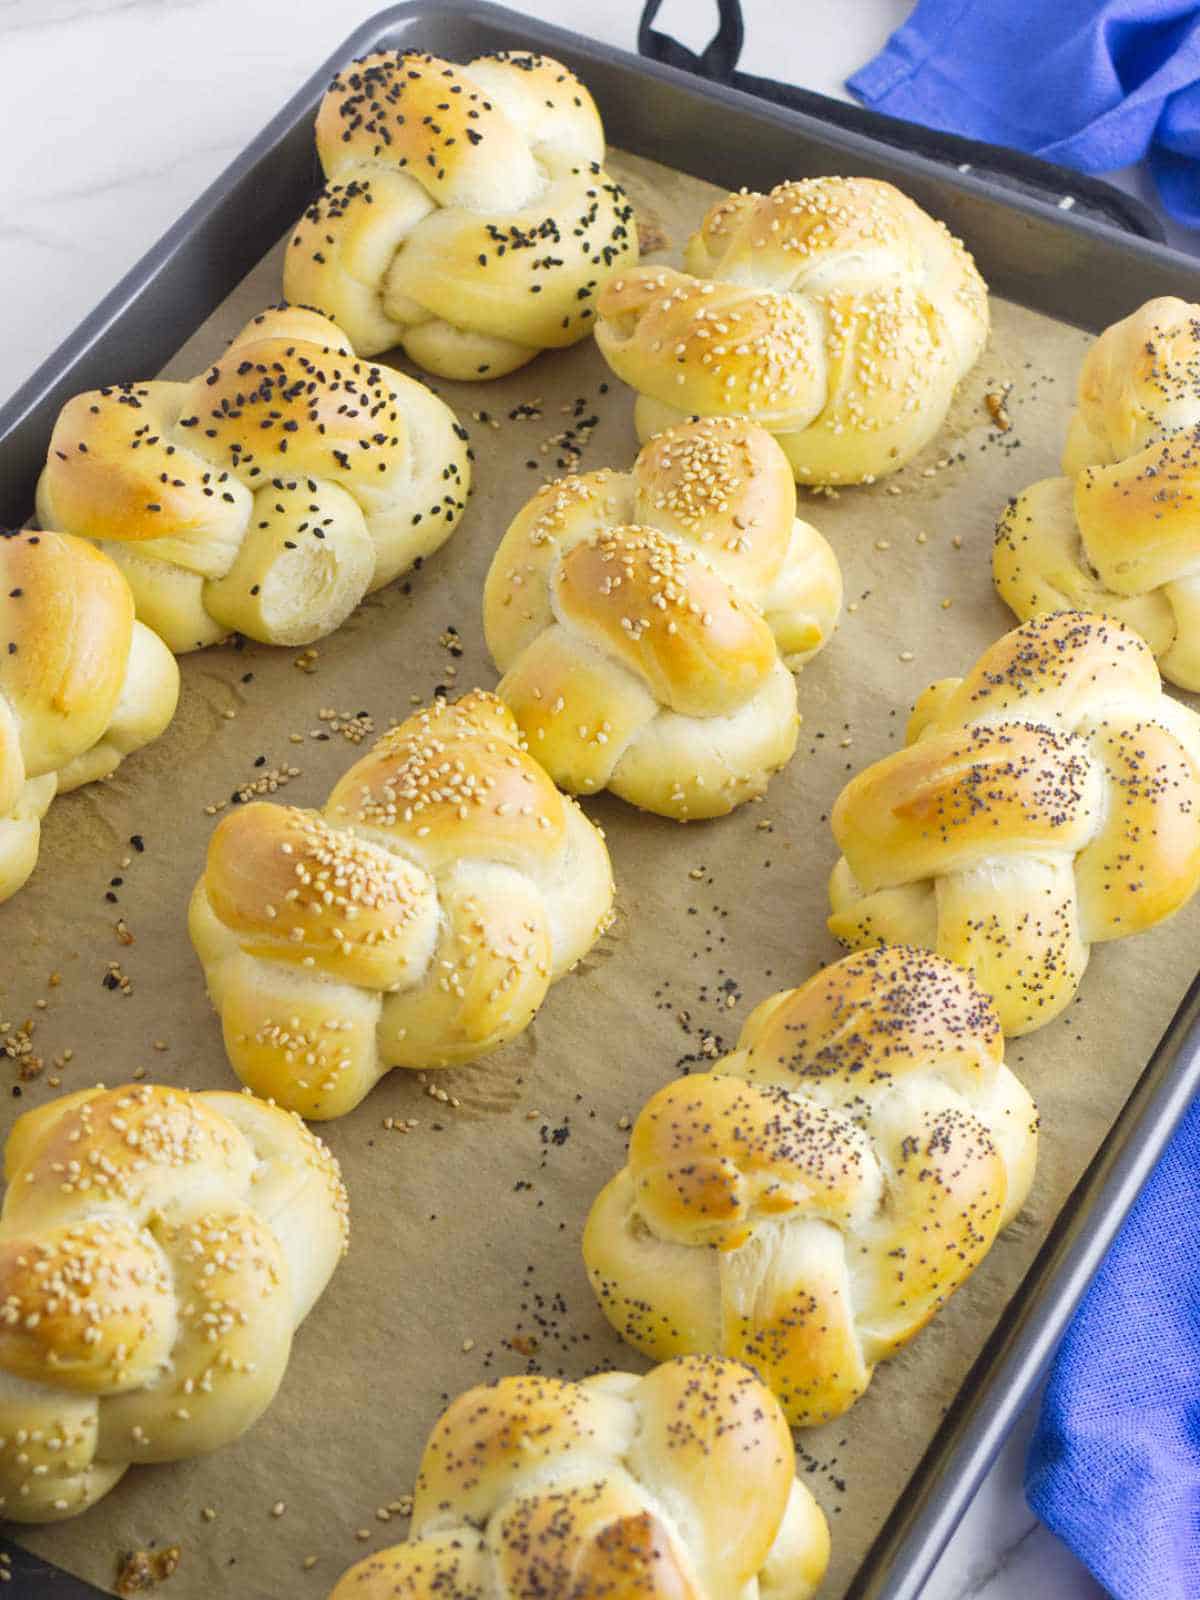 golden brown challah rolls fresh from the oven on a baking sheet.